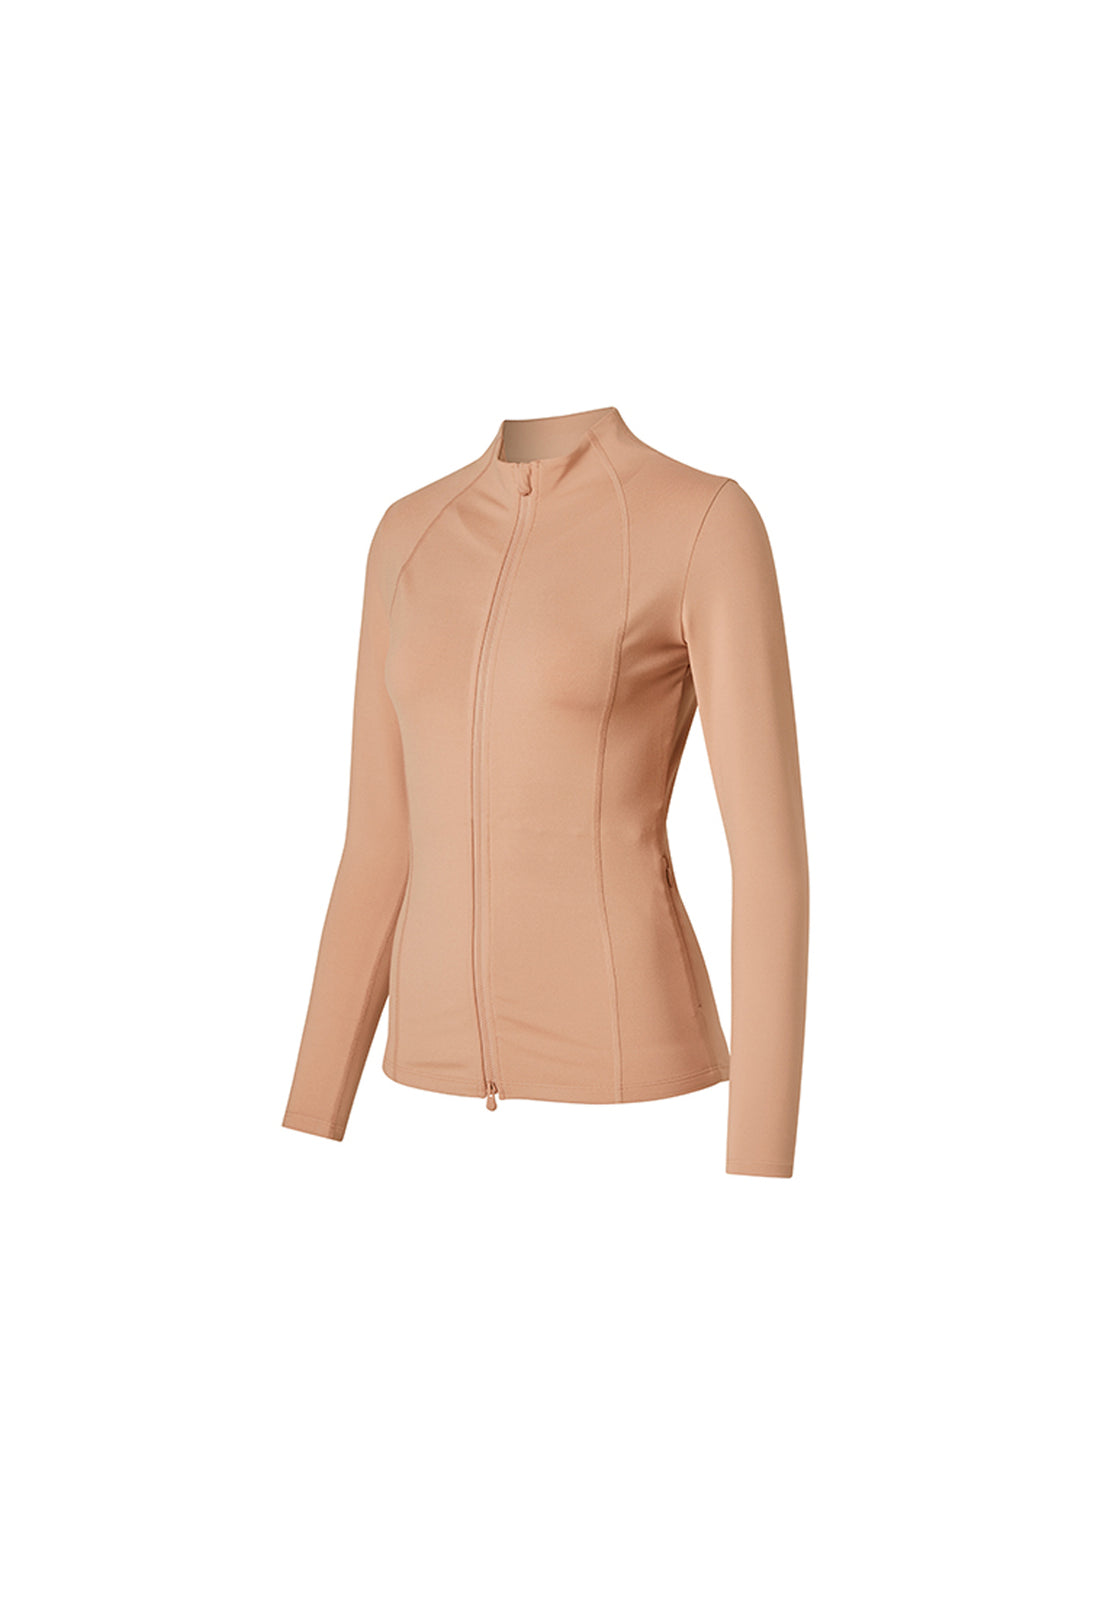 XELLA Intention Slim Fit Zip-up Jacket - Awesome Peach